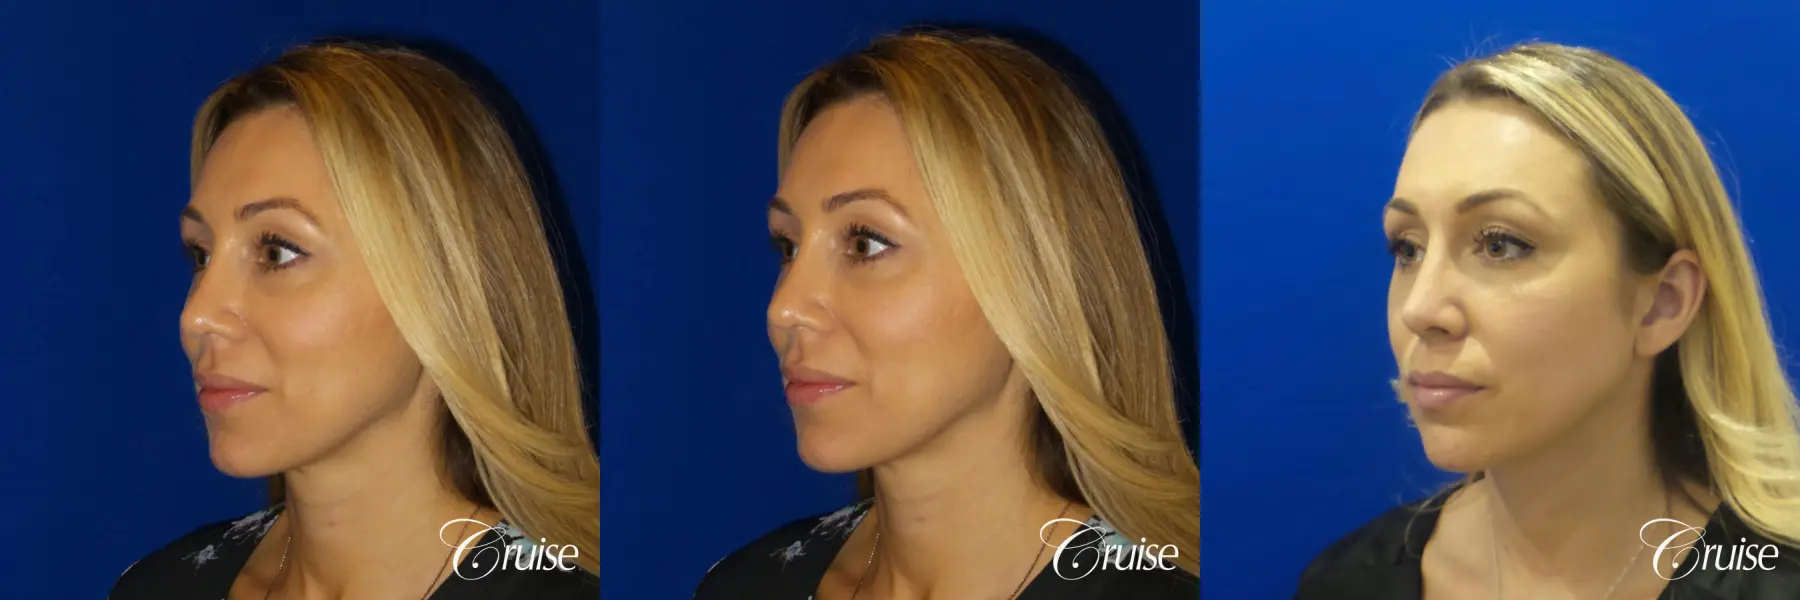 Rhinoplasty: Hump Reduction & Nasal Tip Refinement - Before and After 5